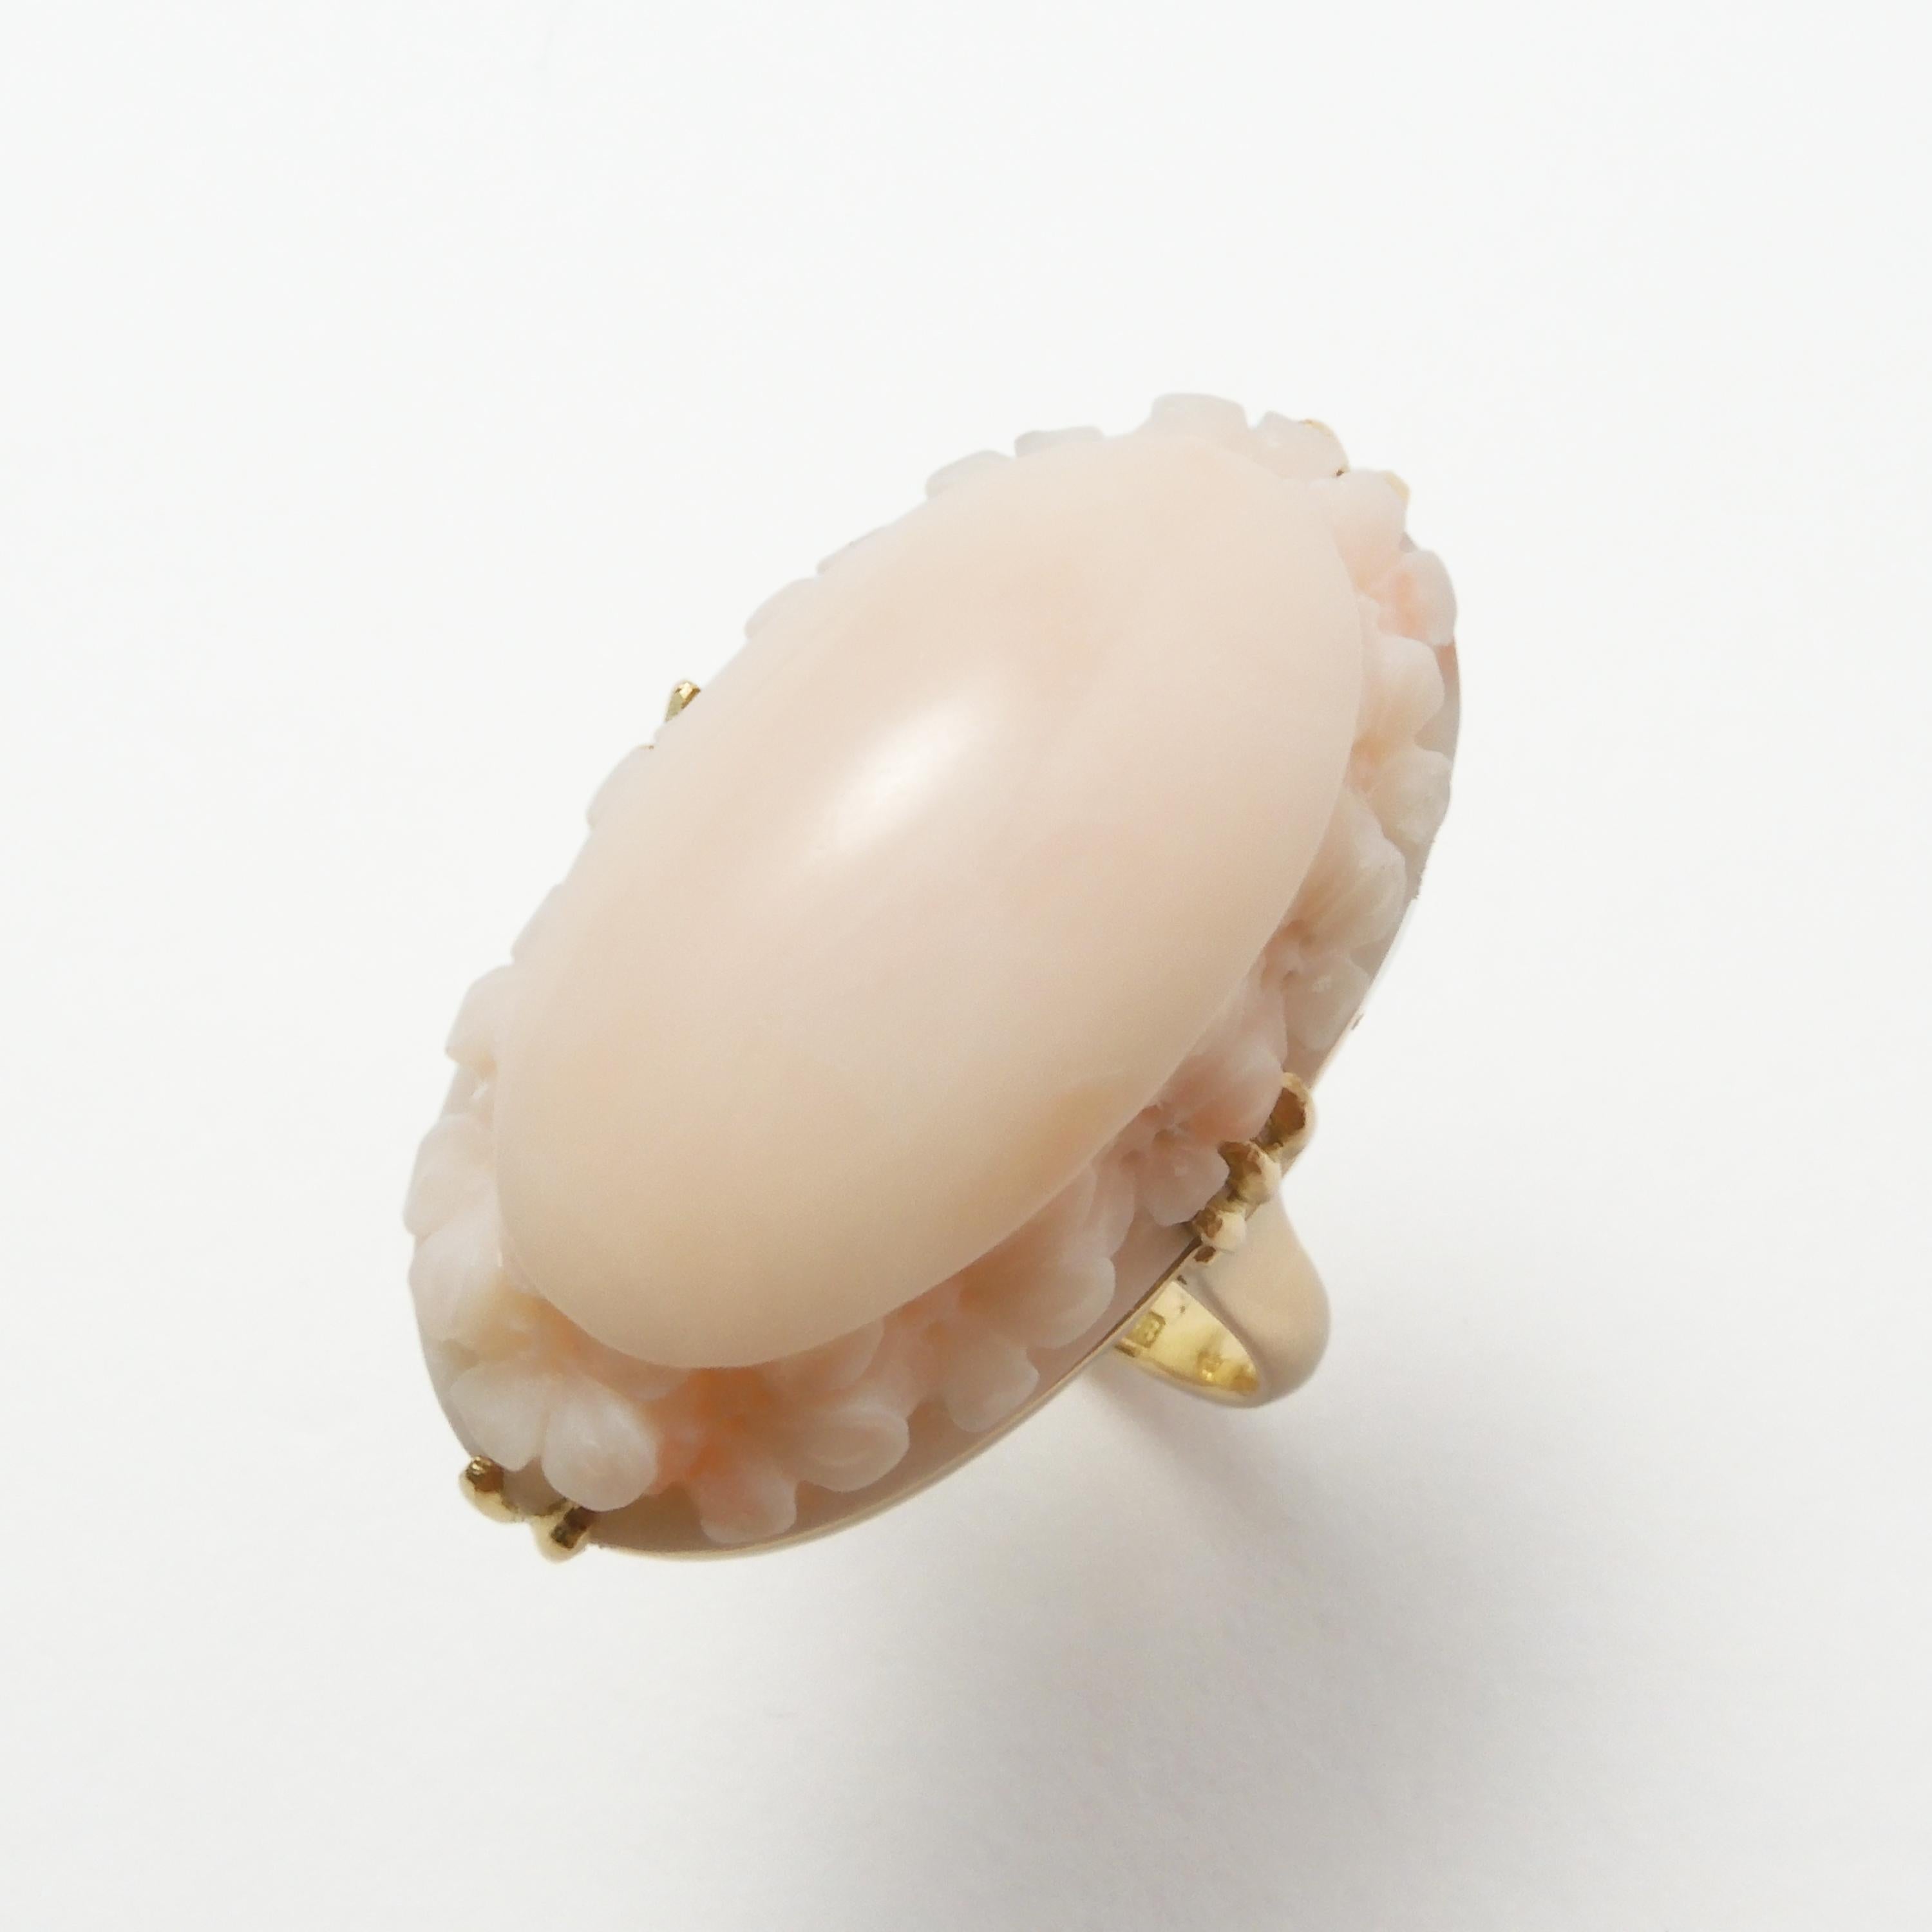 This coral is collected in the deep sea off the Midway Islands. This large size coral is rarely seen now. There are almost no scratches and the piece is in perfect condition. The pale pink color mixed with white shows the genuine characteristics of